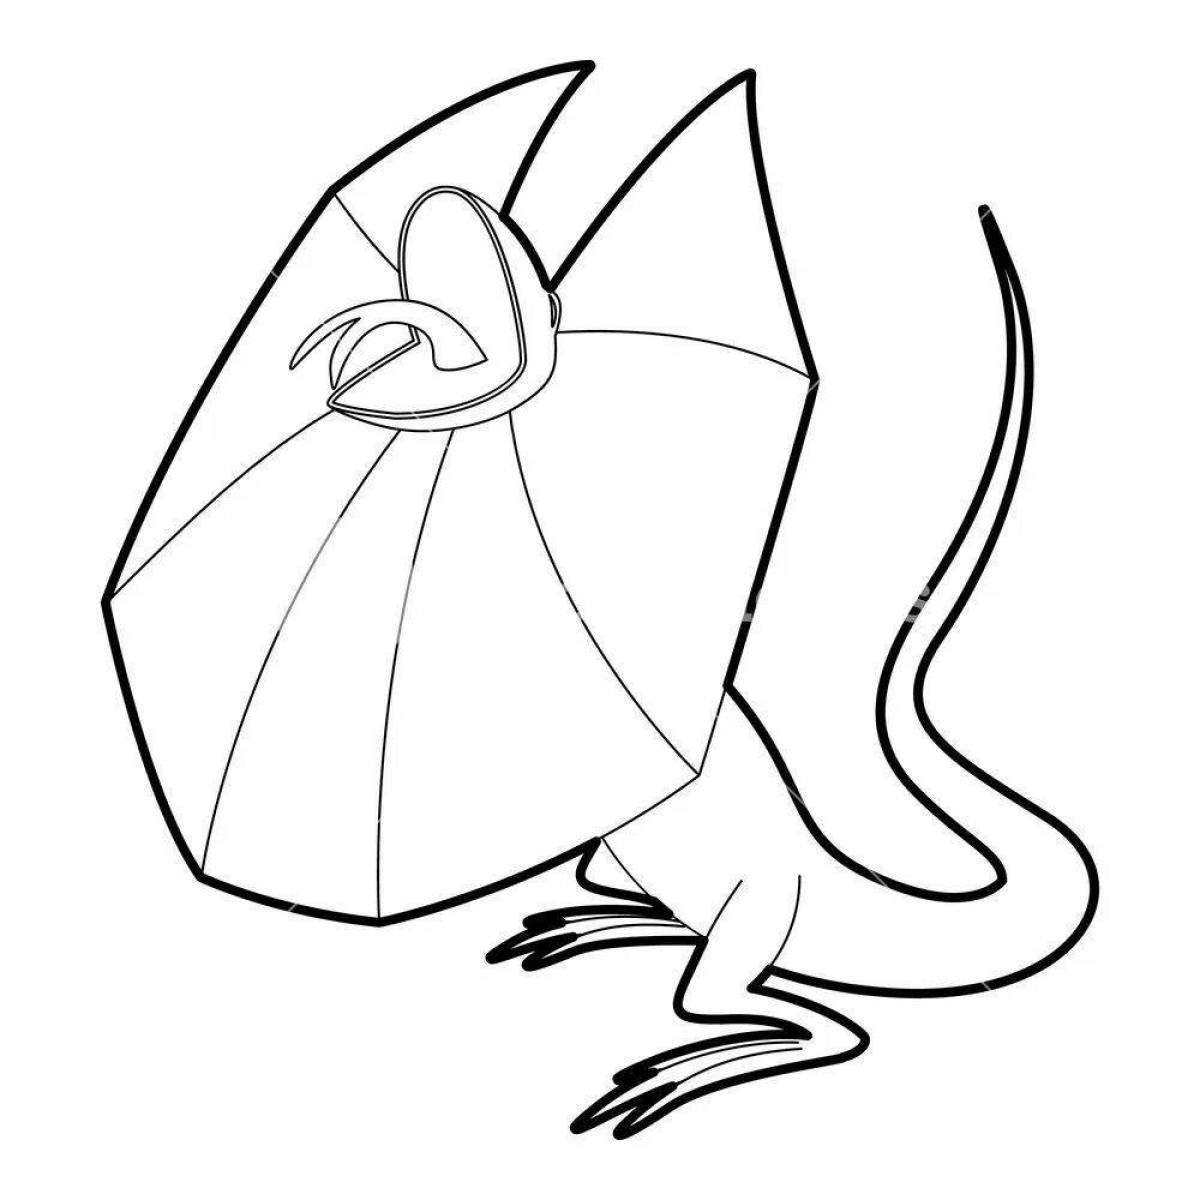 Coloring page elegant frilled lizard